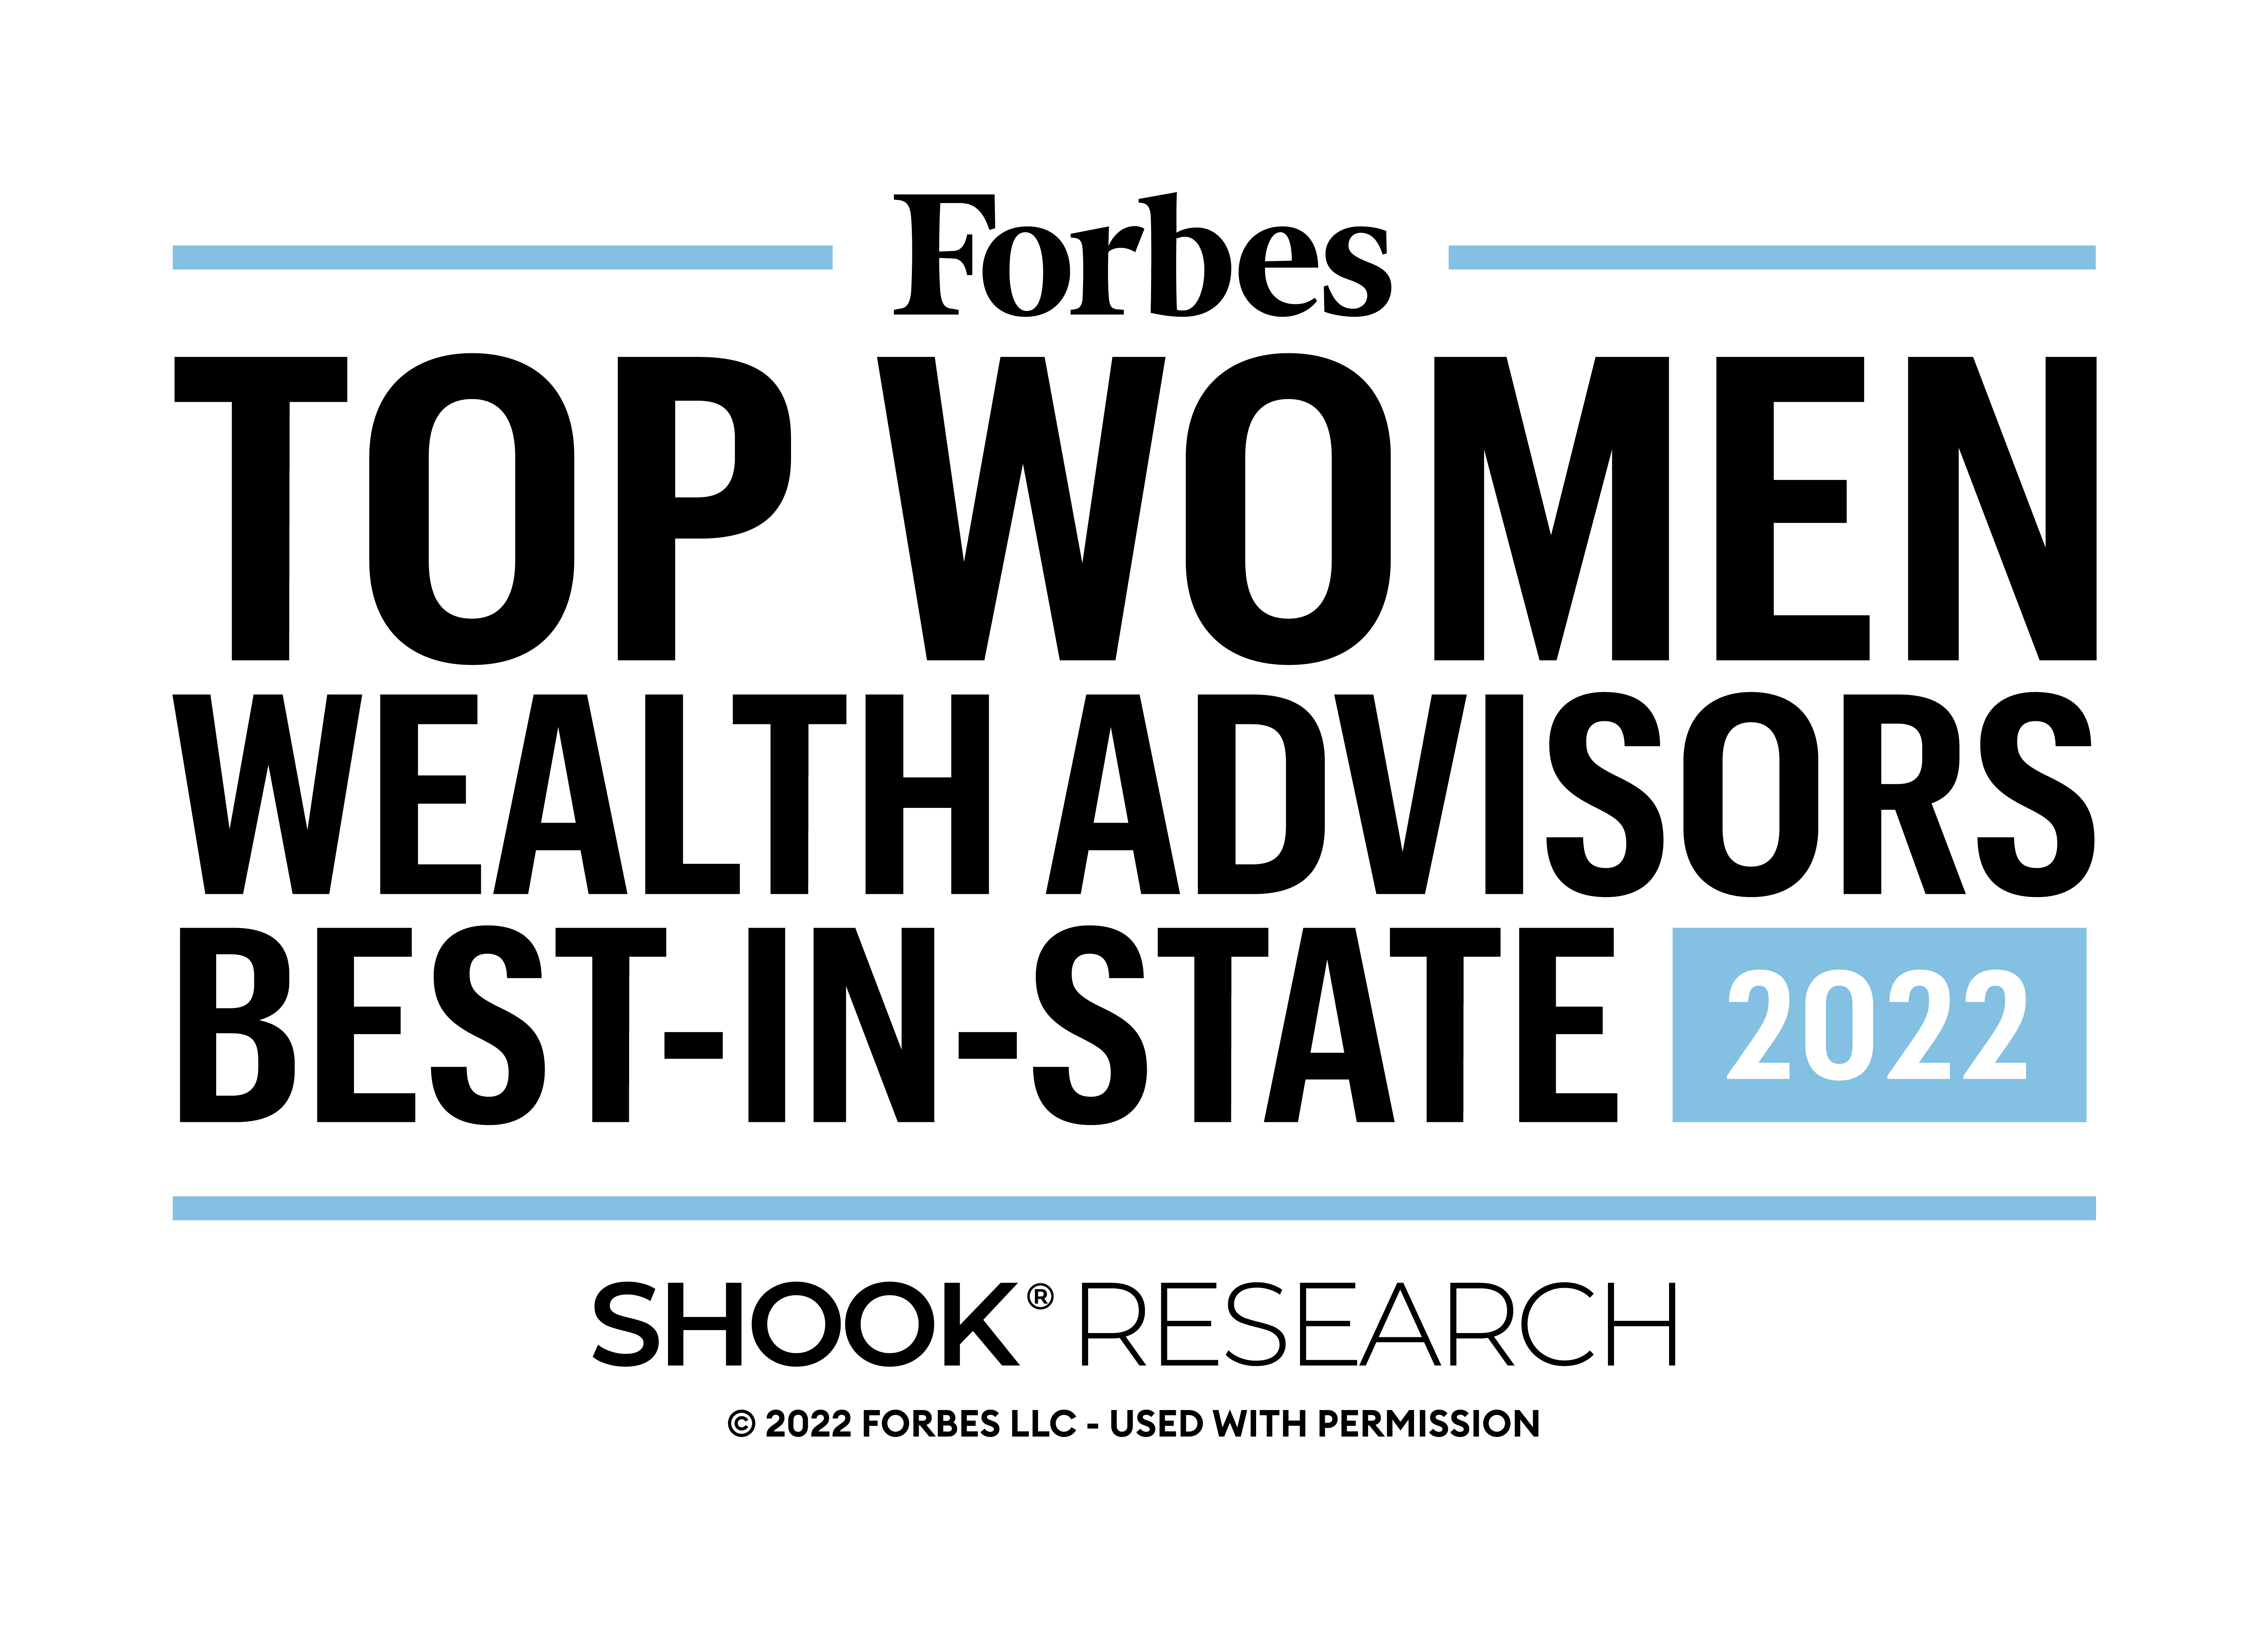 Forbes Top Women Wealth Advisors best-in-state 2022